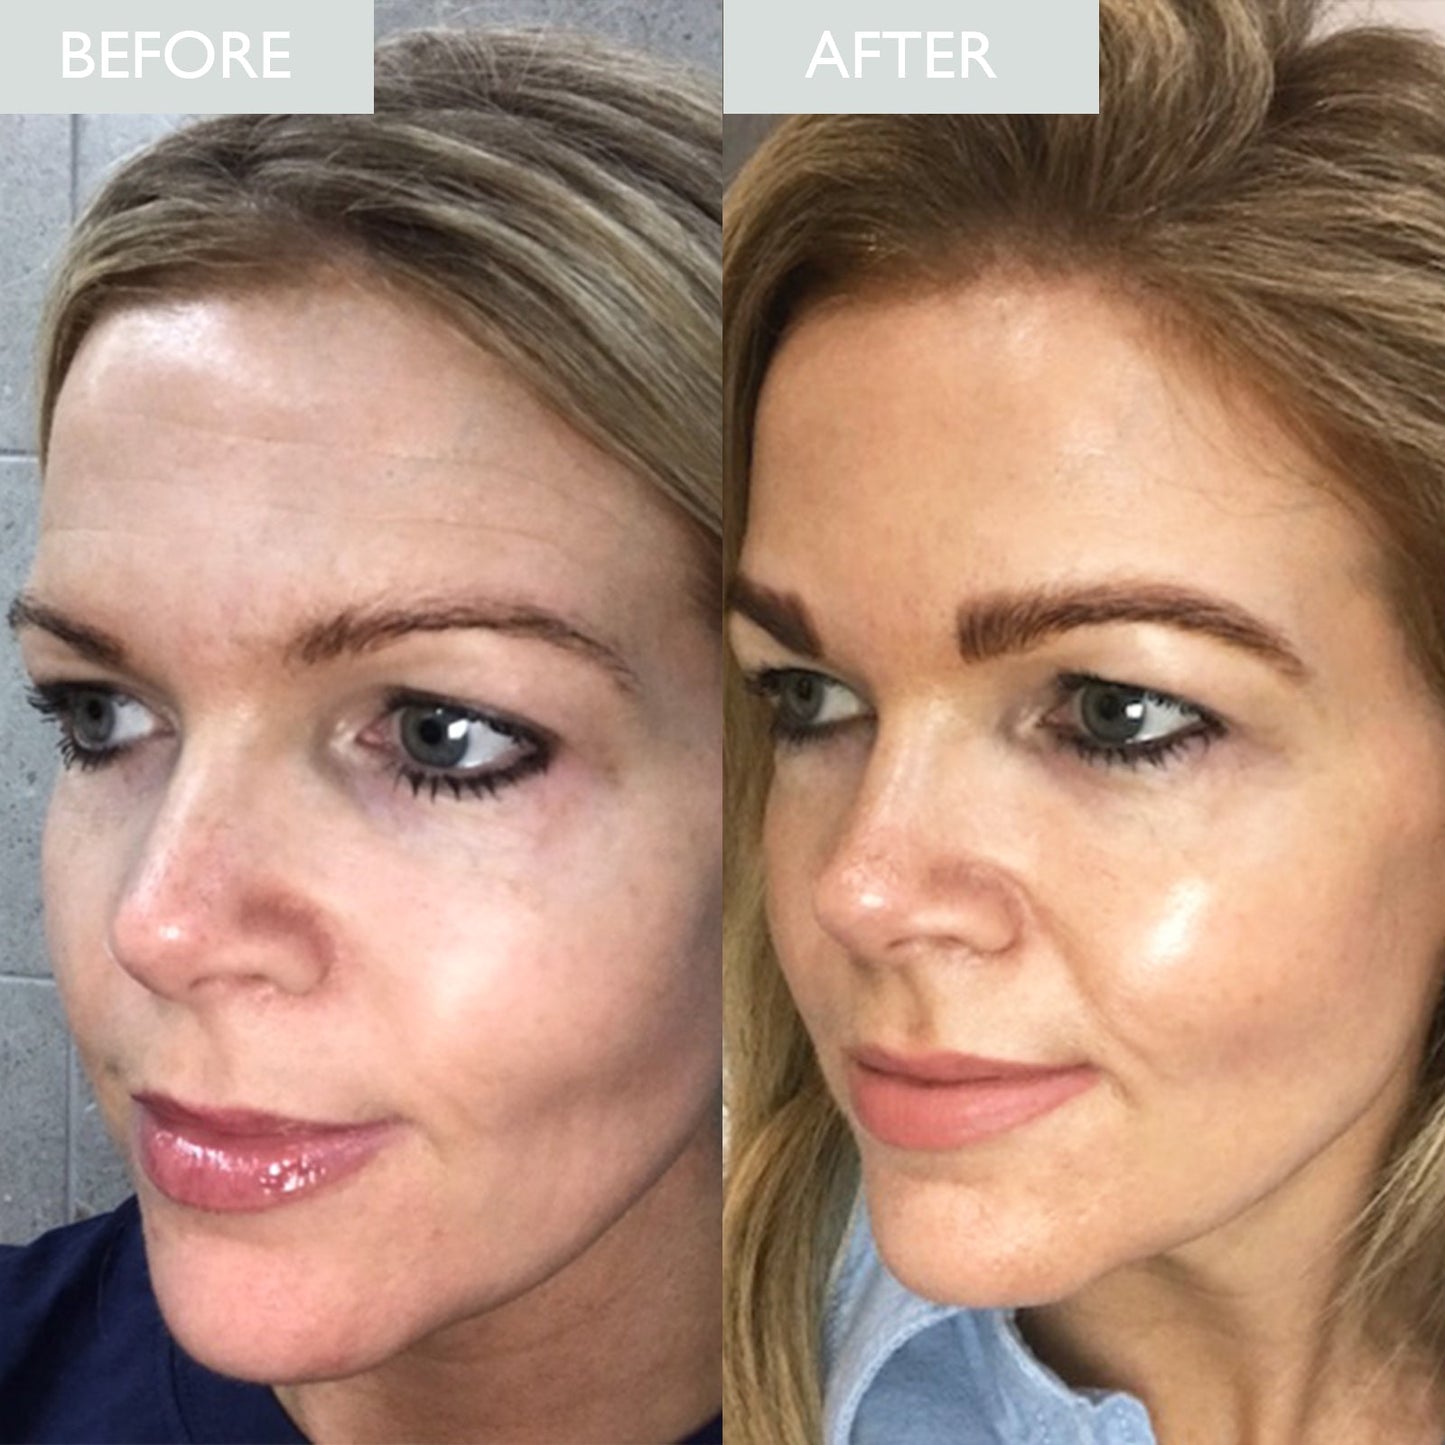 Before and after image of a lady after using skinicians advanced ageing products.